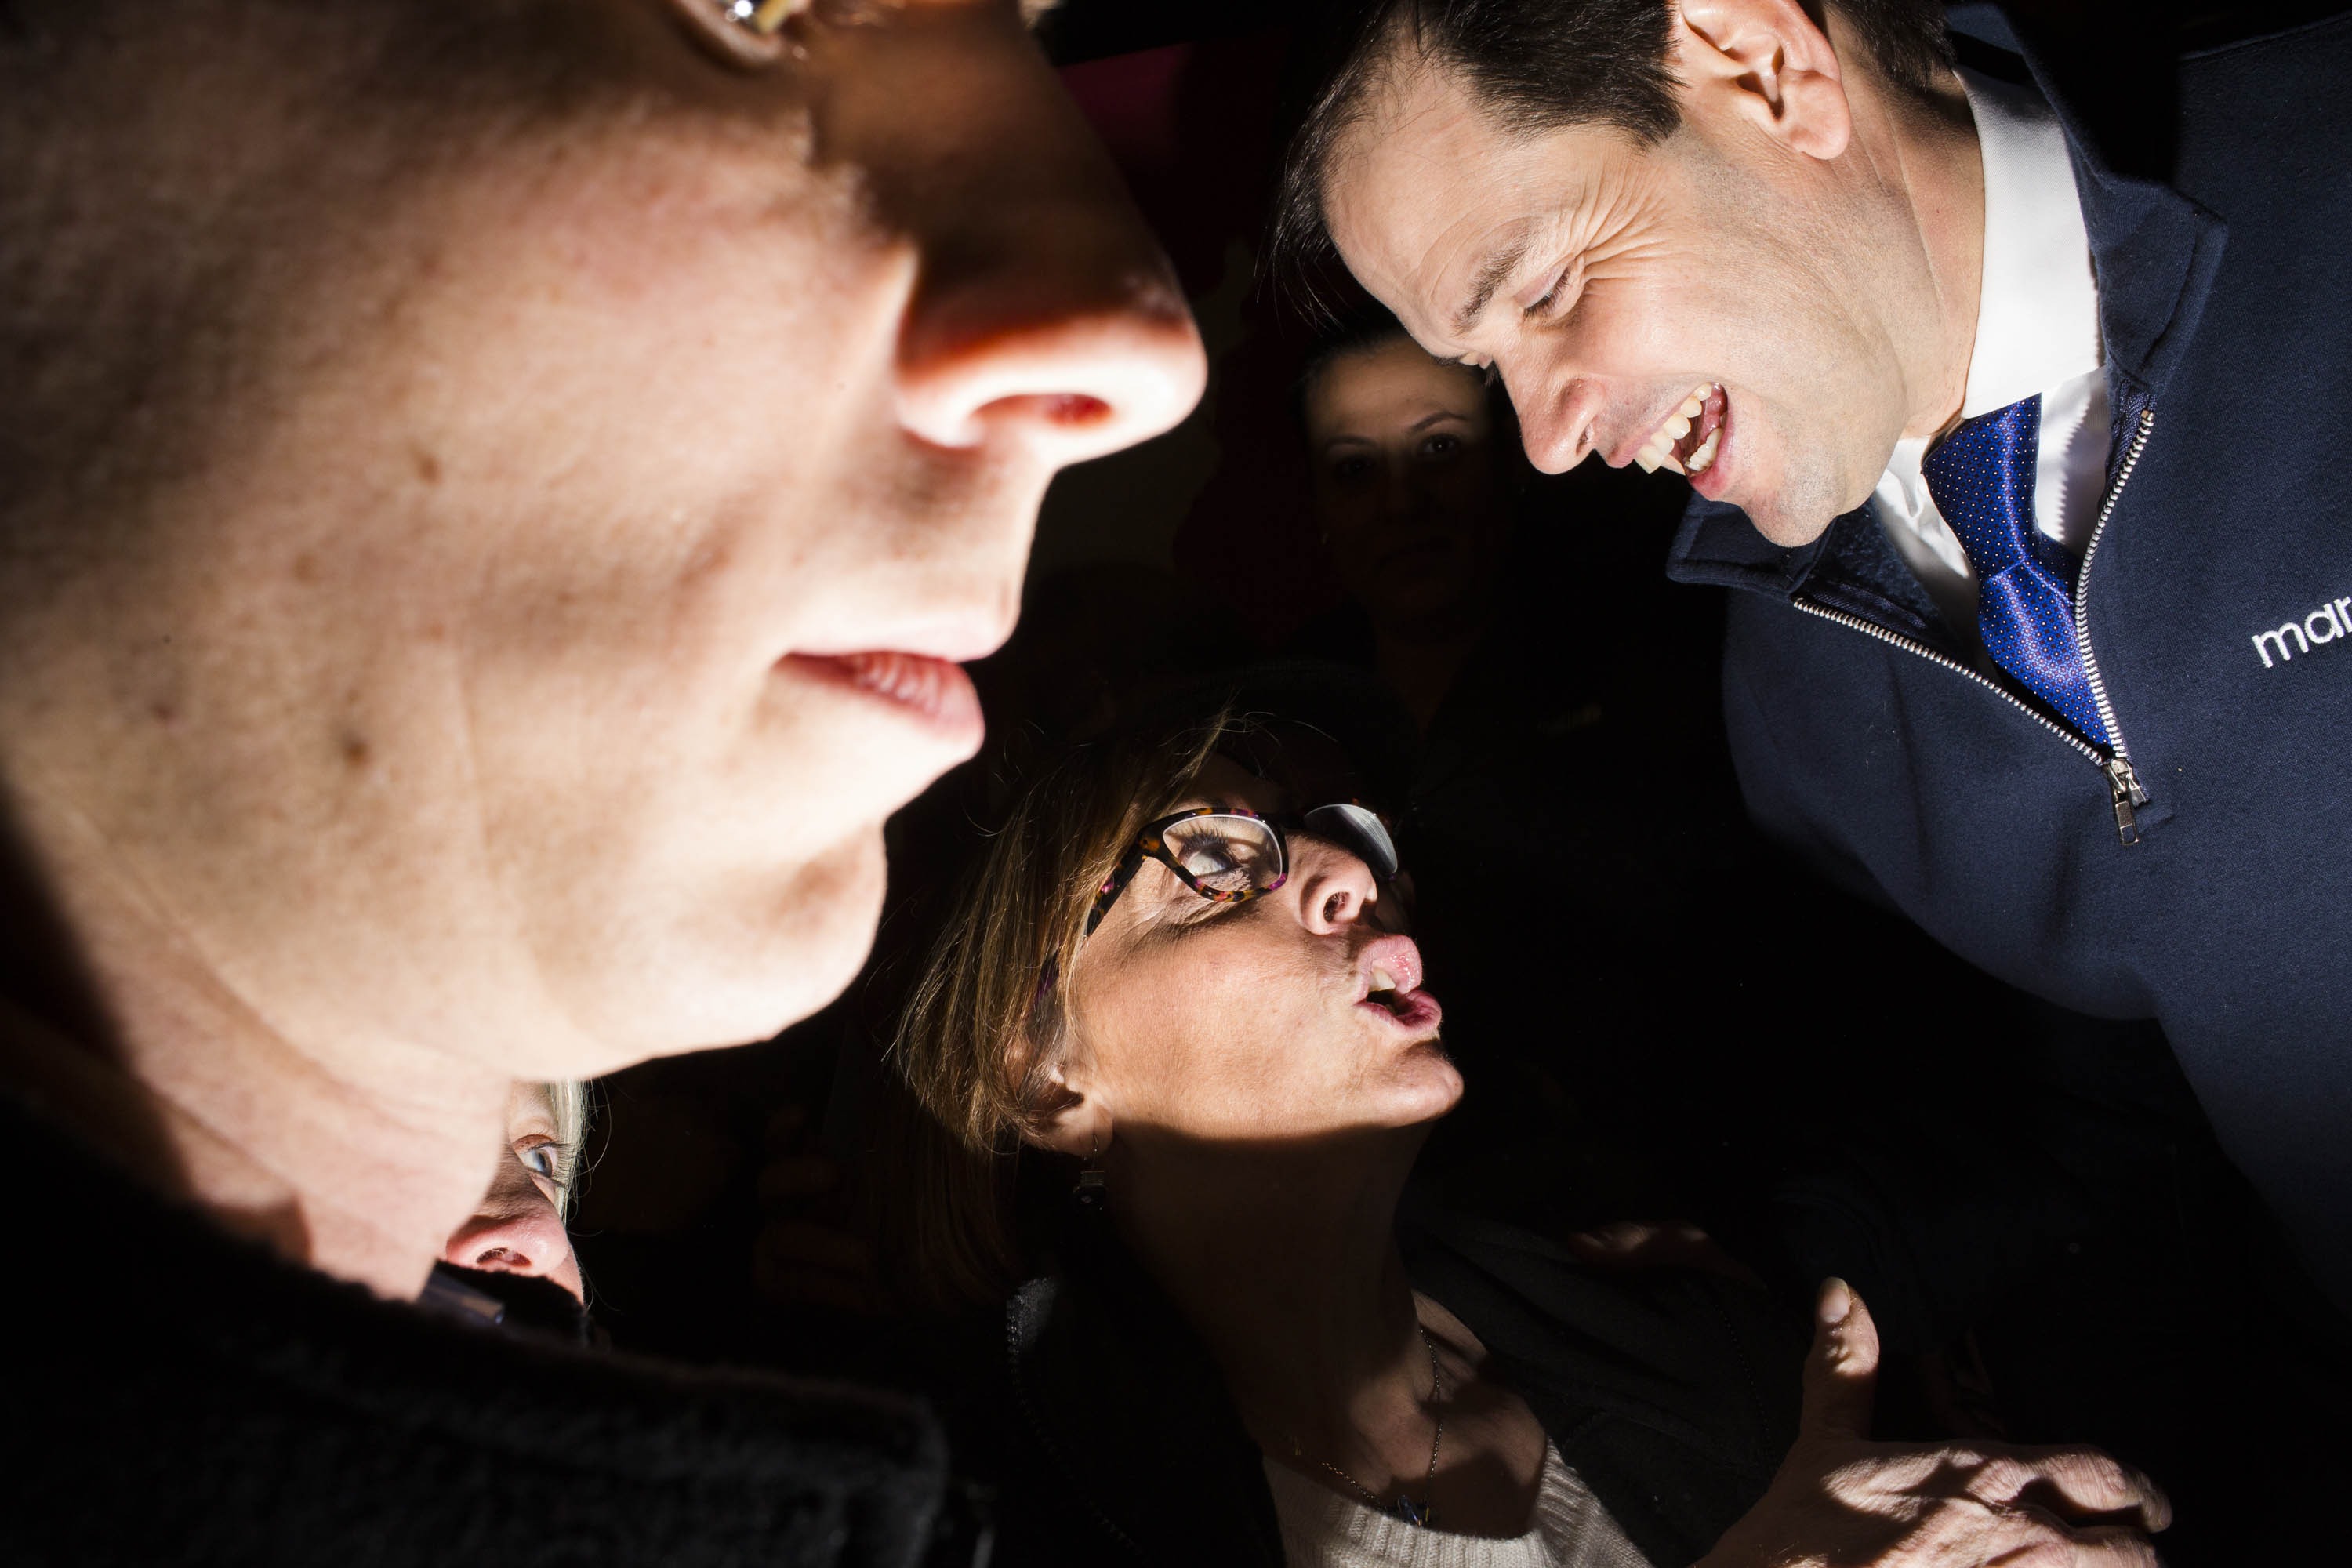 Florida. Sen. Marco Rubio greets supporters during a campaign event at the Allard Center on Feb. 7, 2016, in Manchester, N.H.